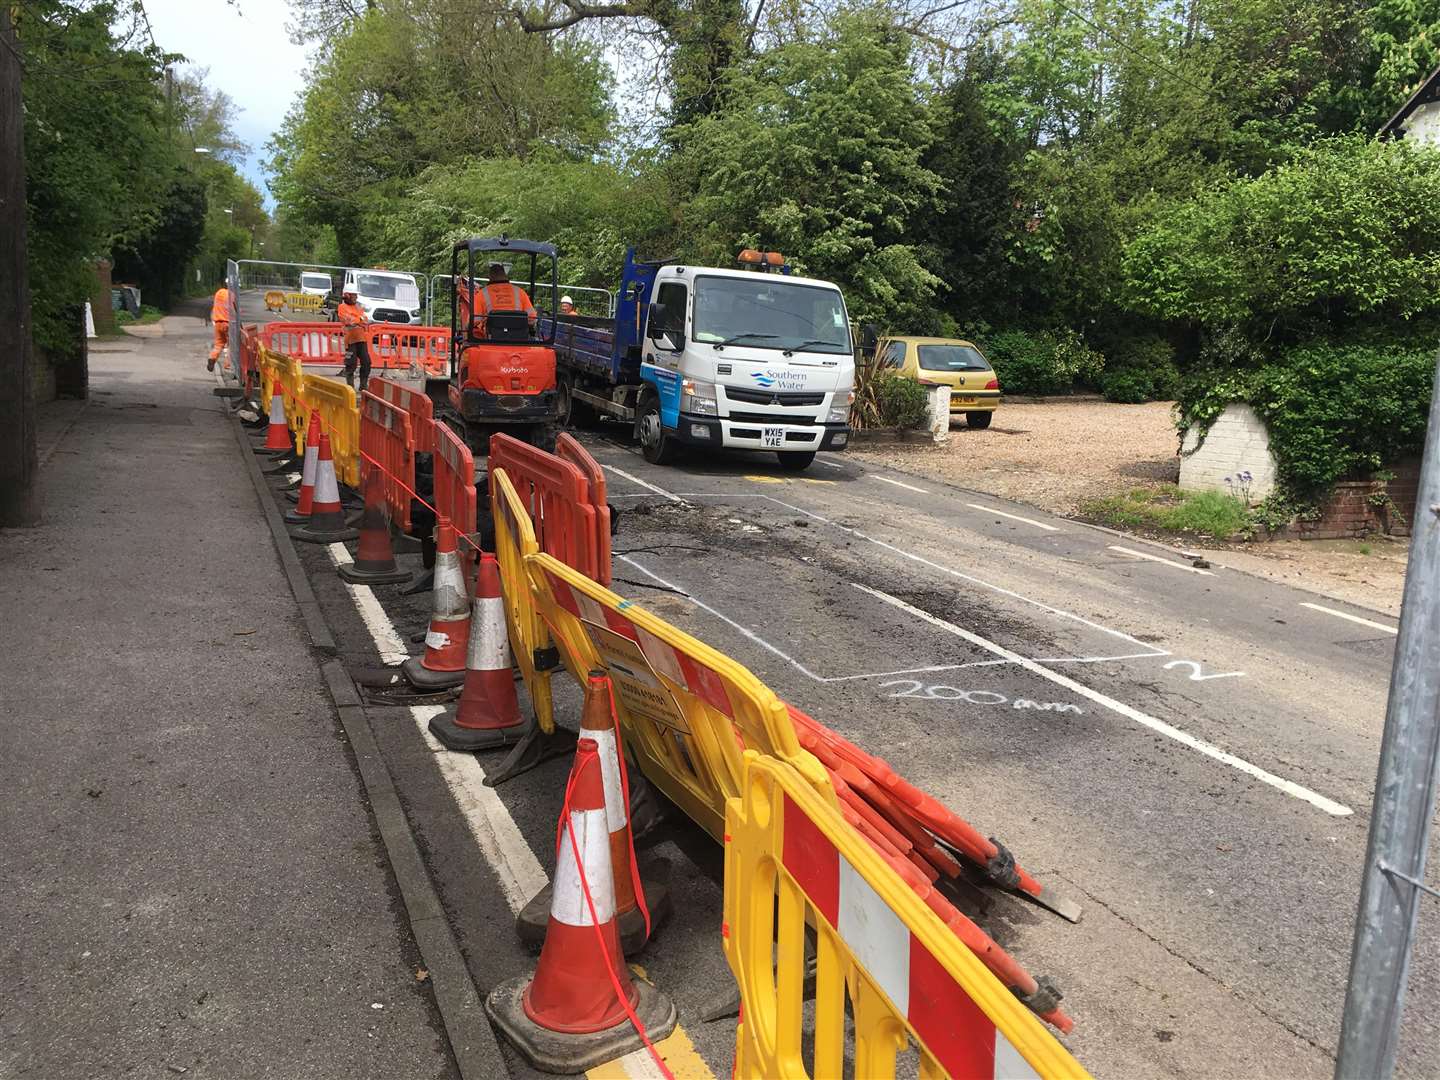 Workmen have started repairing the road